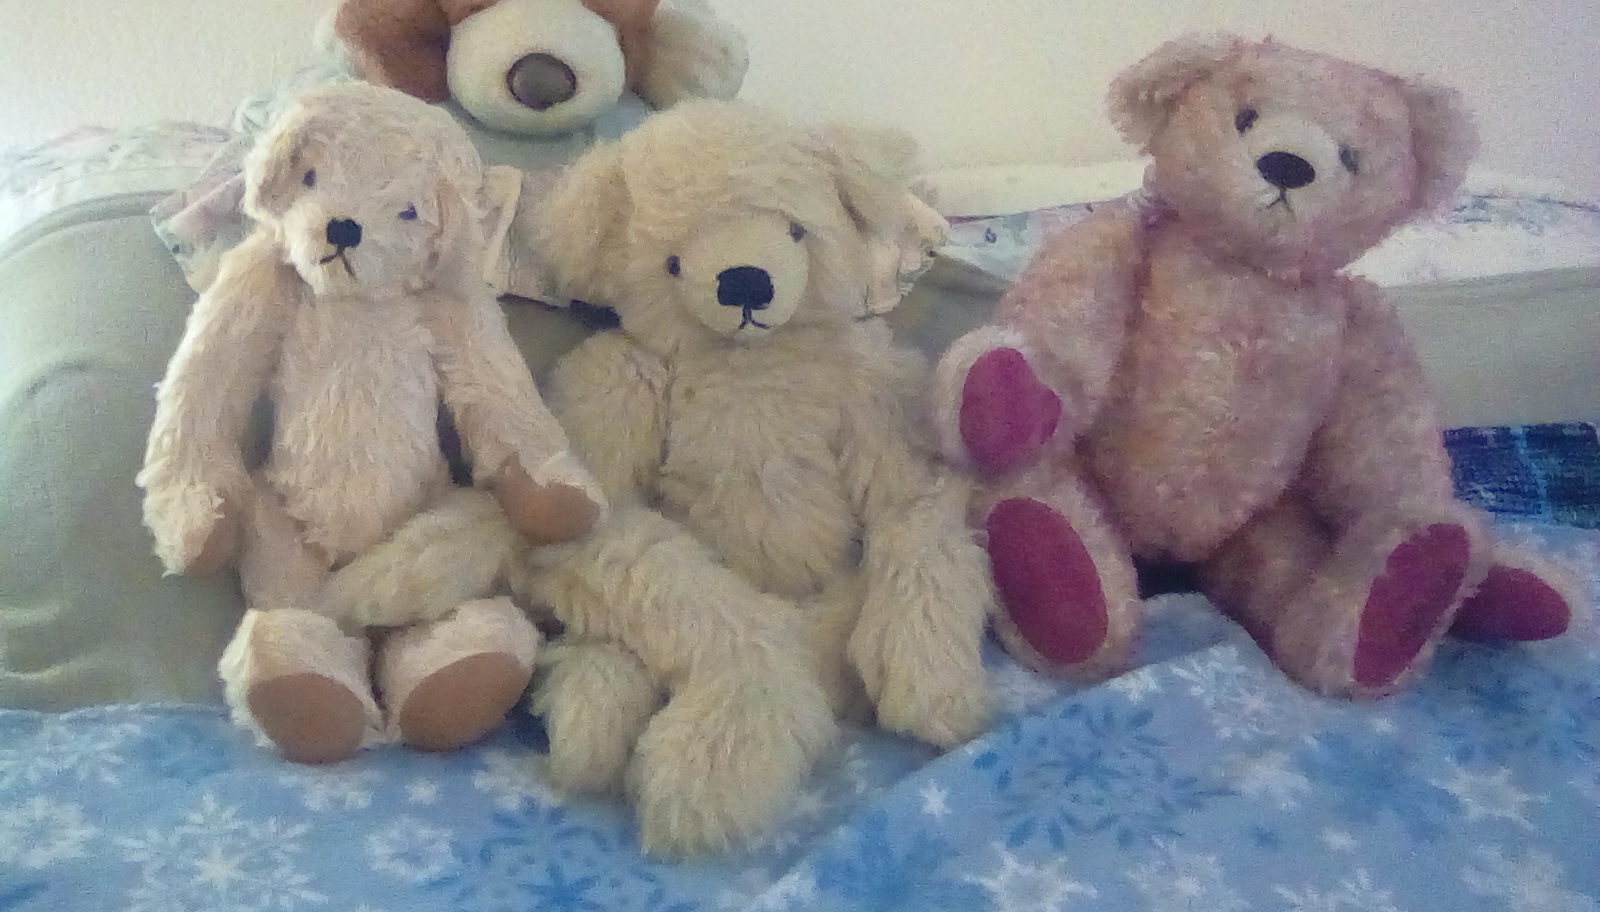 Some of the bears I've made